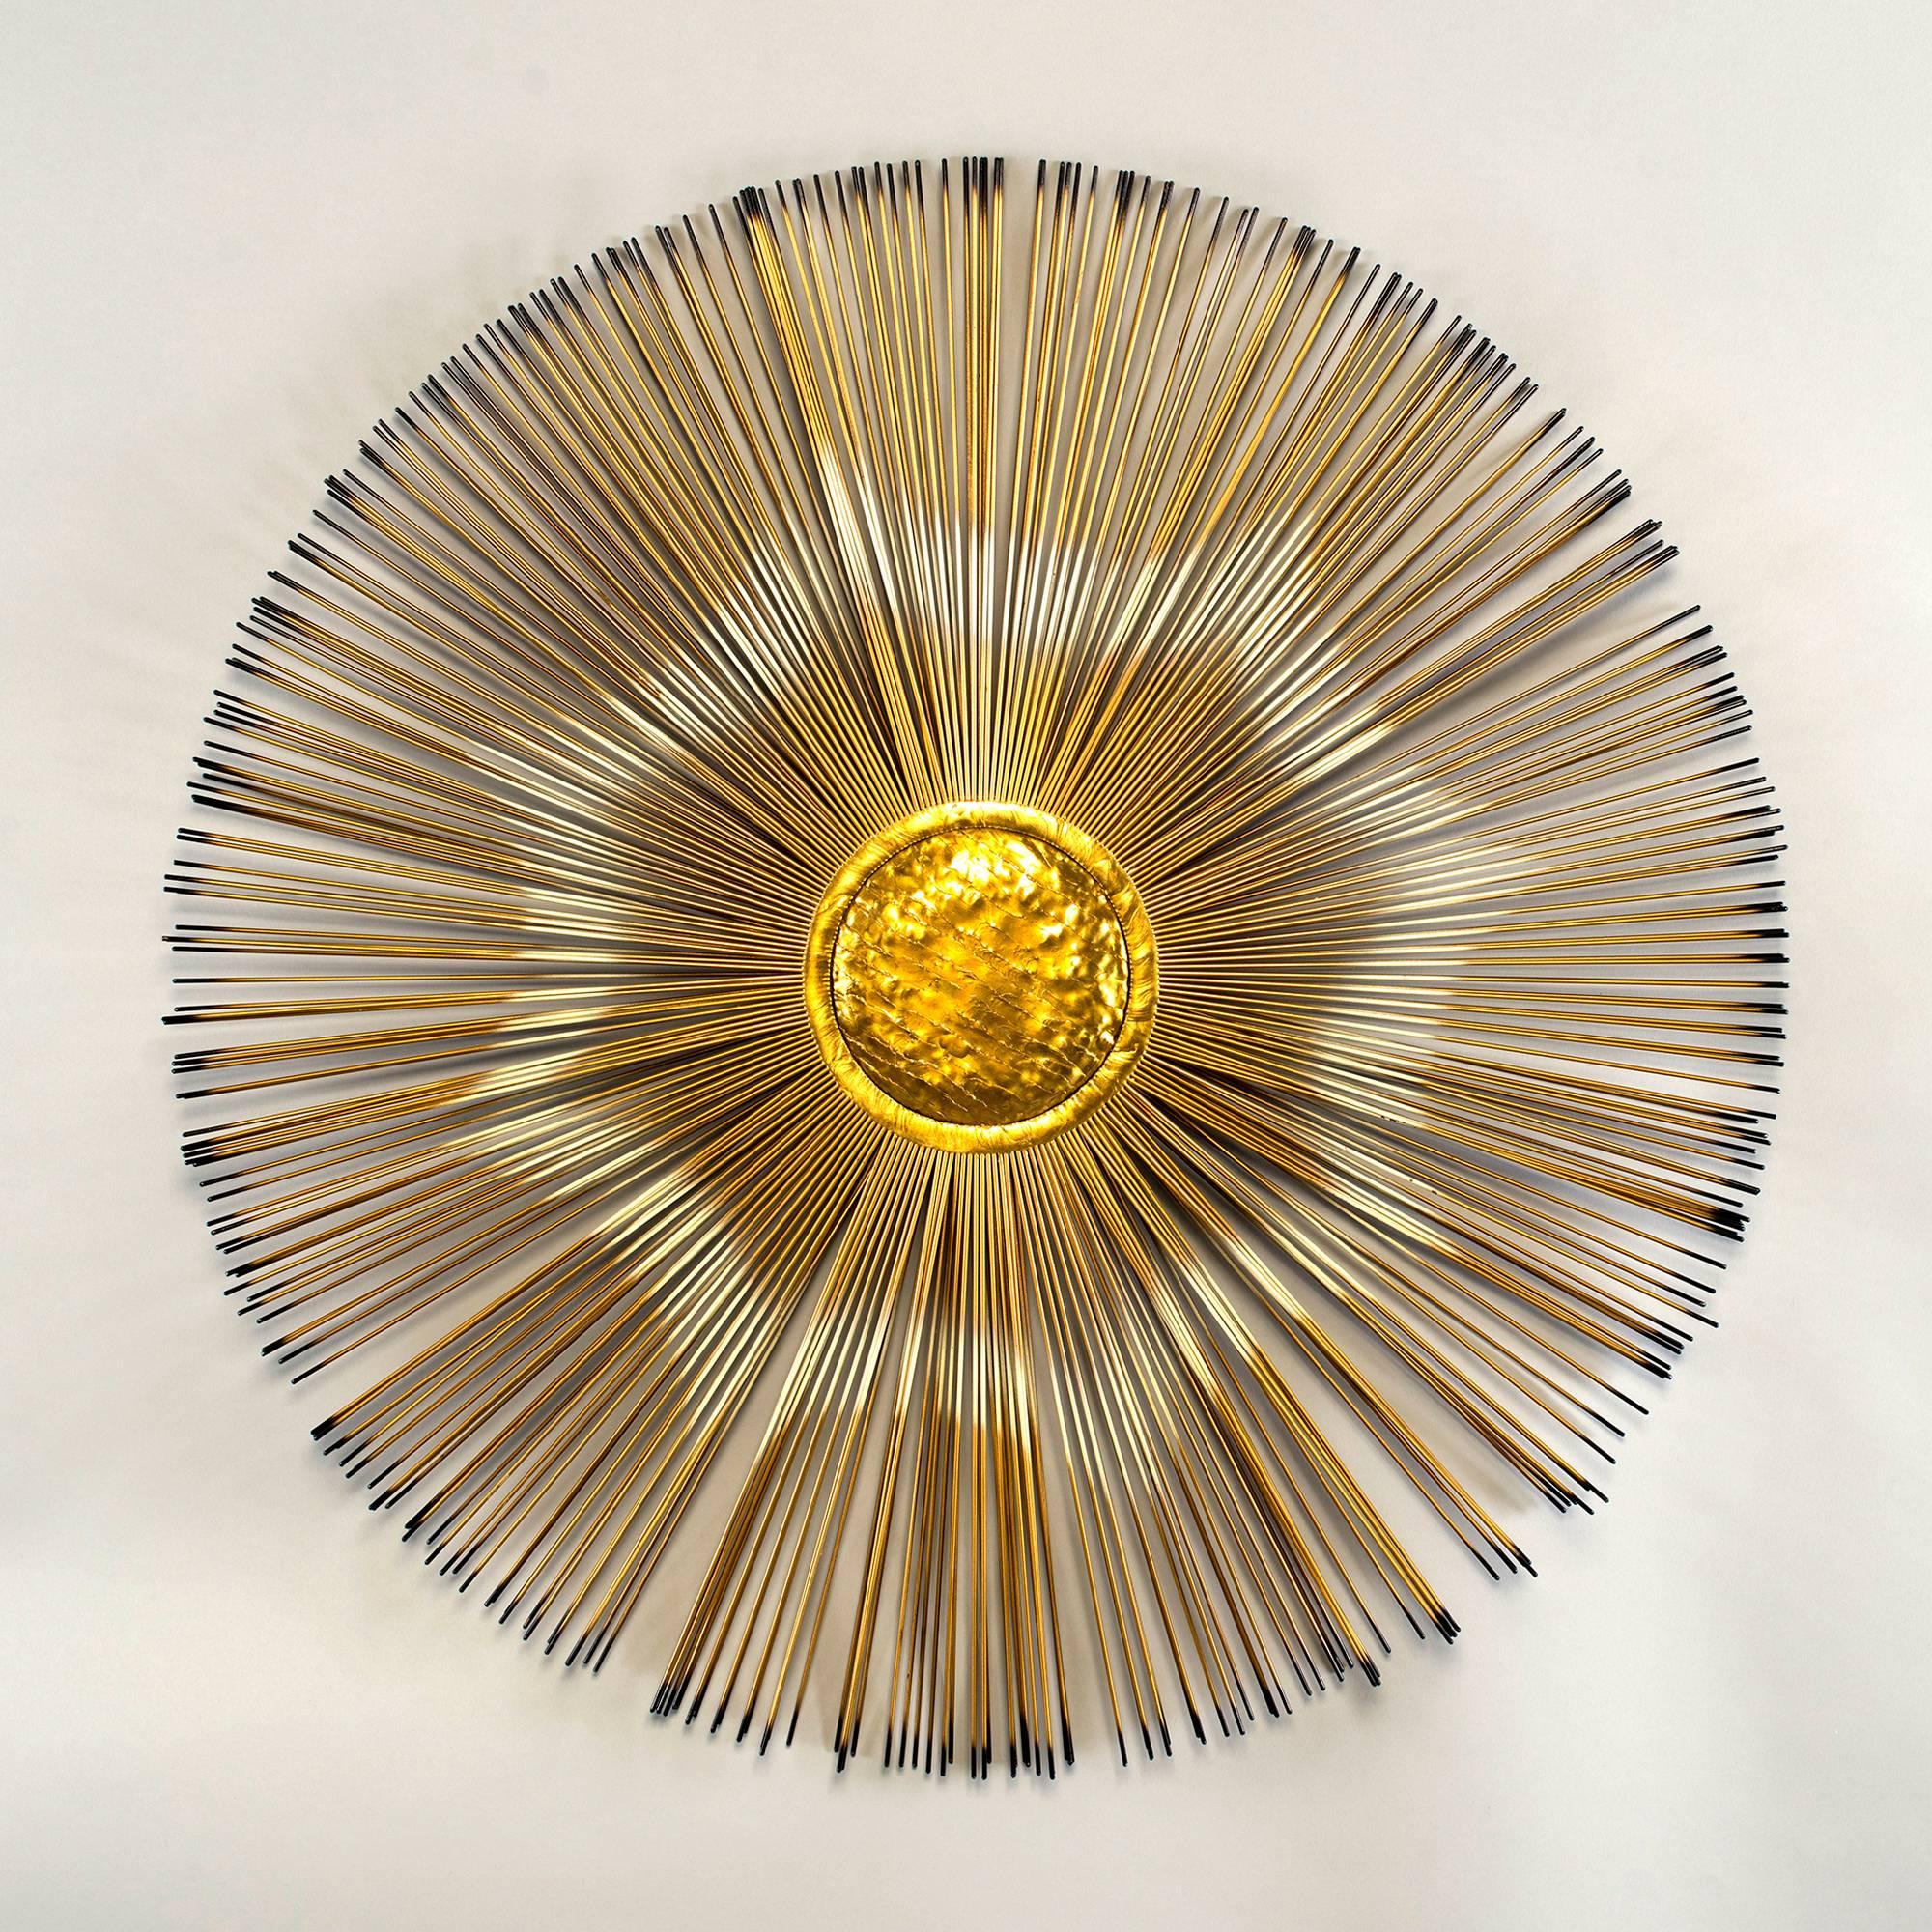 Brass and metal wall sculpture in form of sunburst with bright brass centre and slender metal rays with black tips, circa 1970s. We believe this is a Curtis Jere piece, but found no marks.